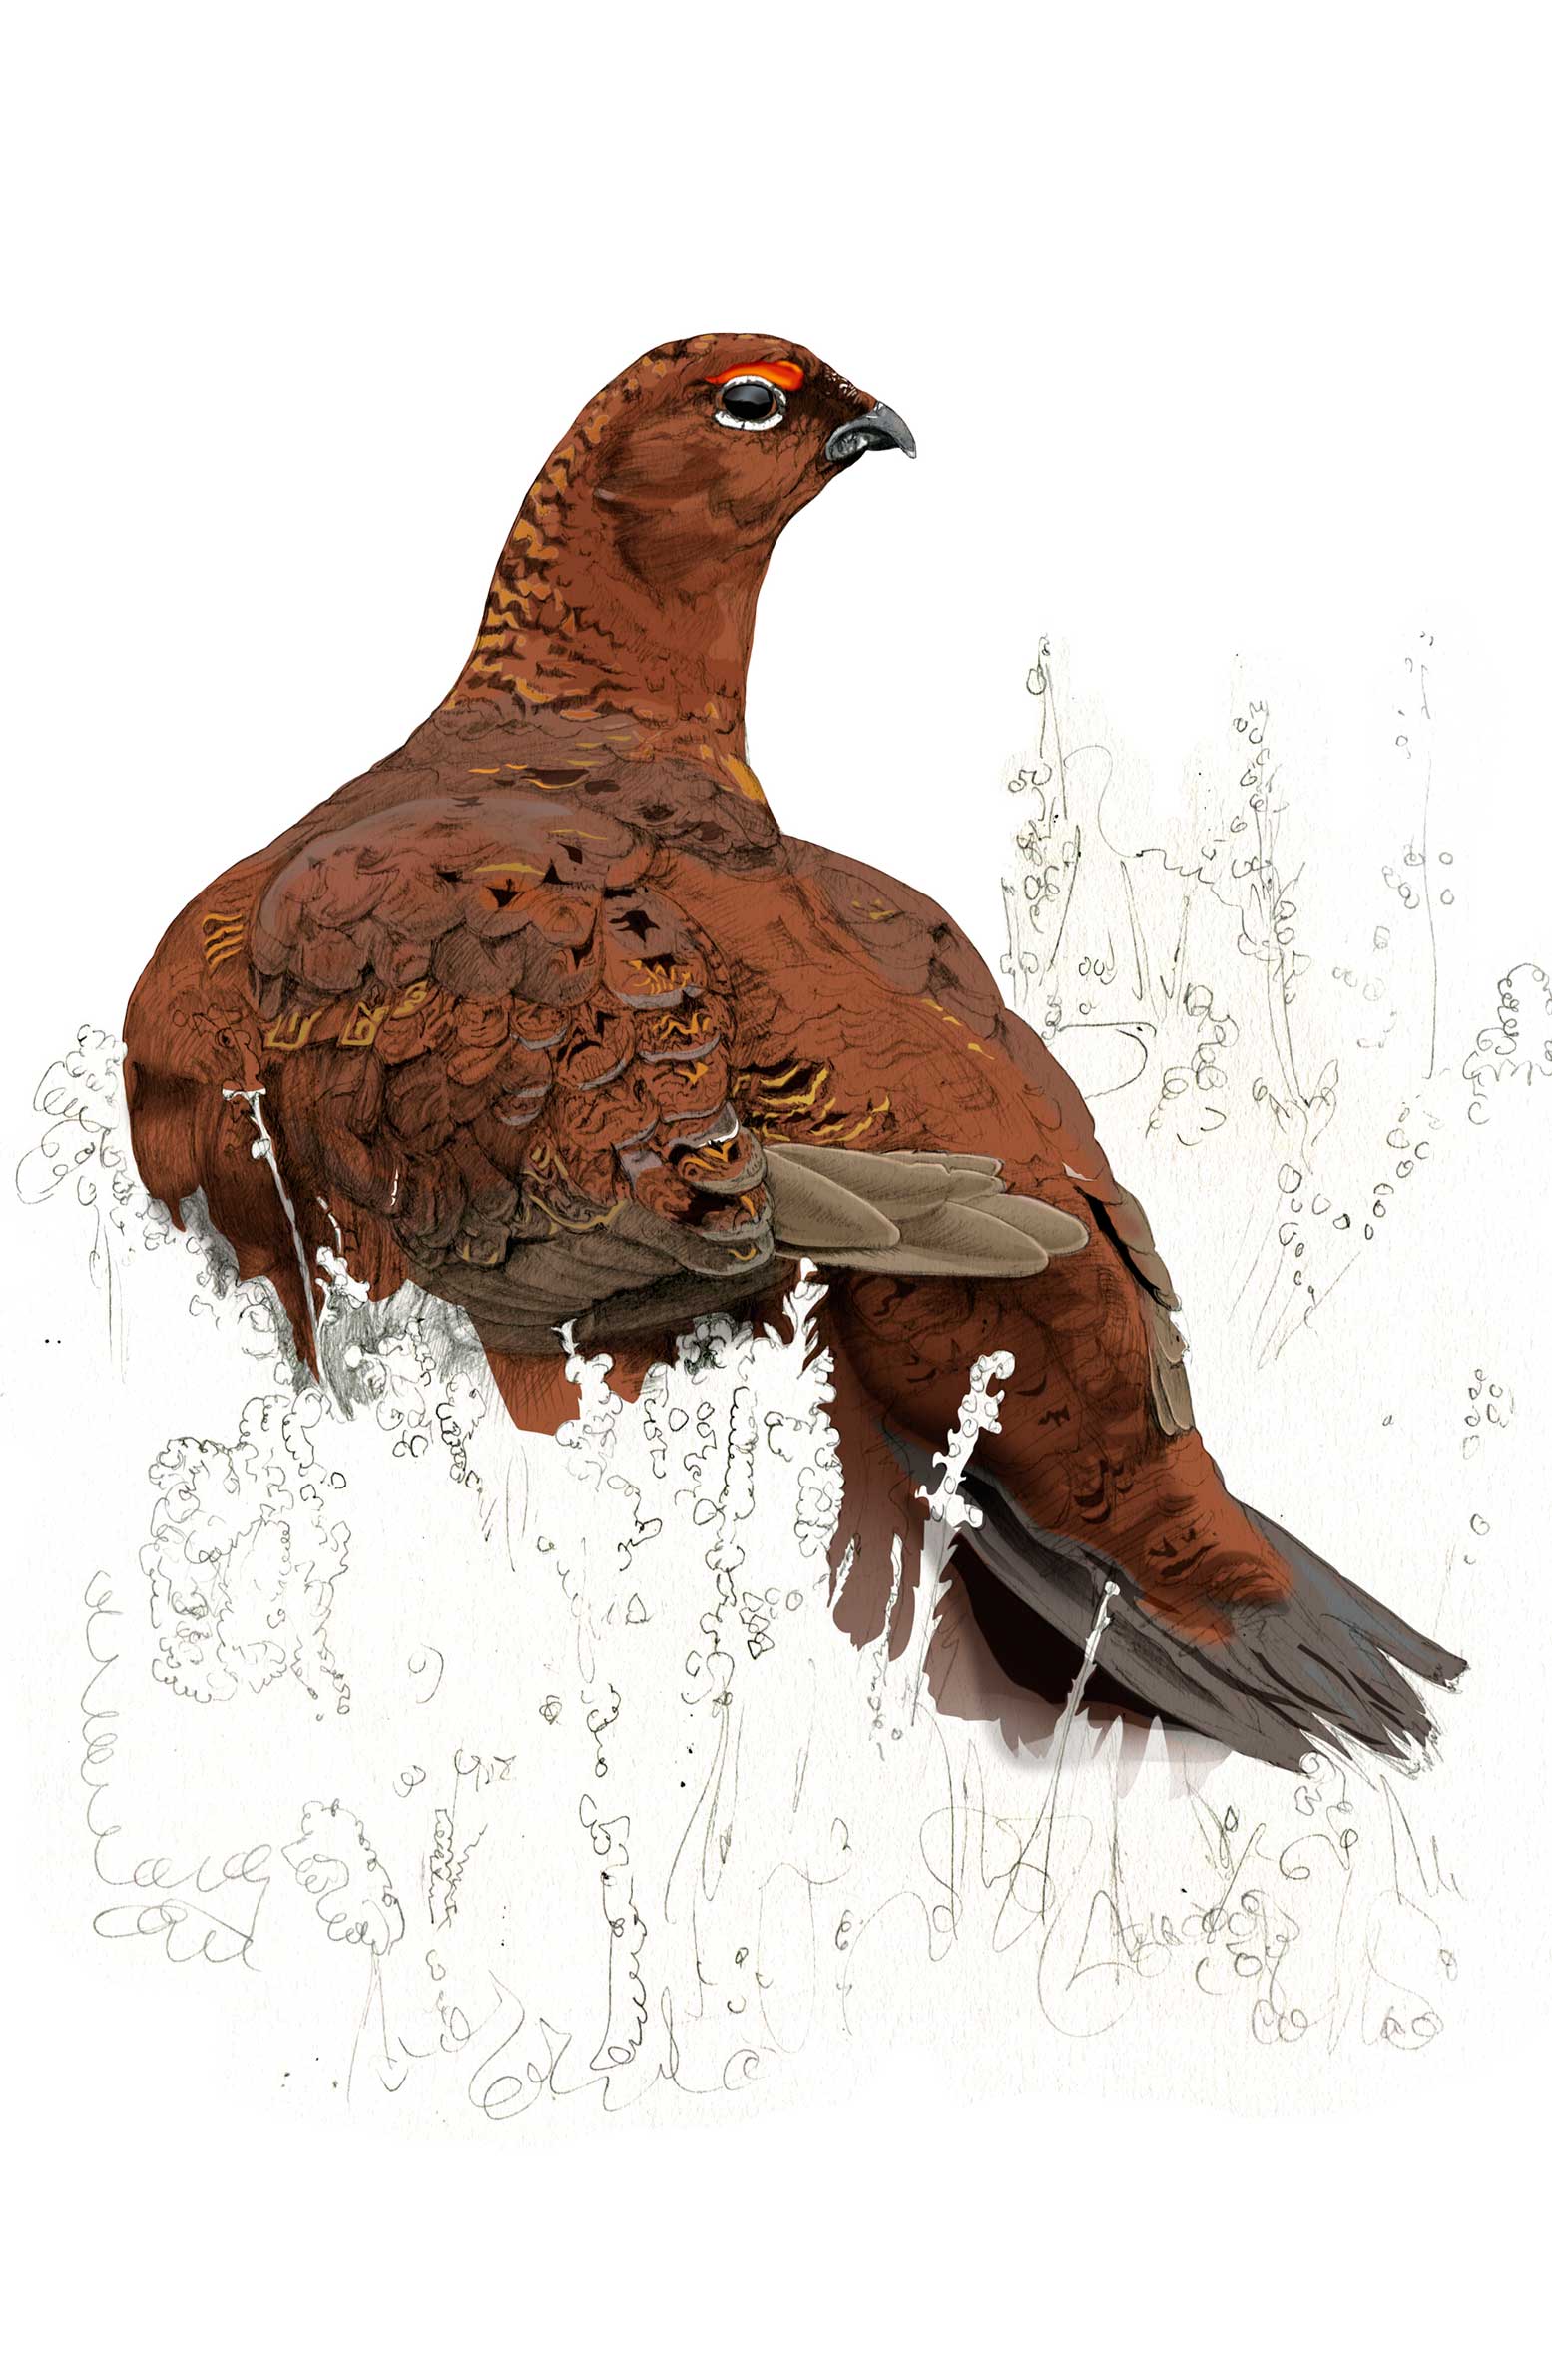 Red Grouse illustration by Nick Ellwood.